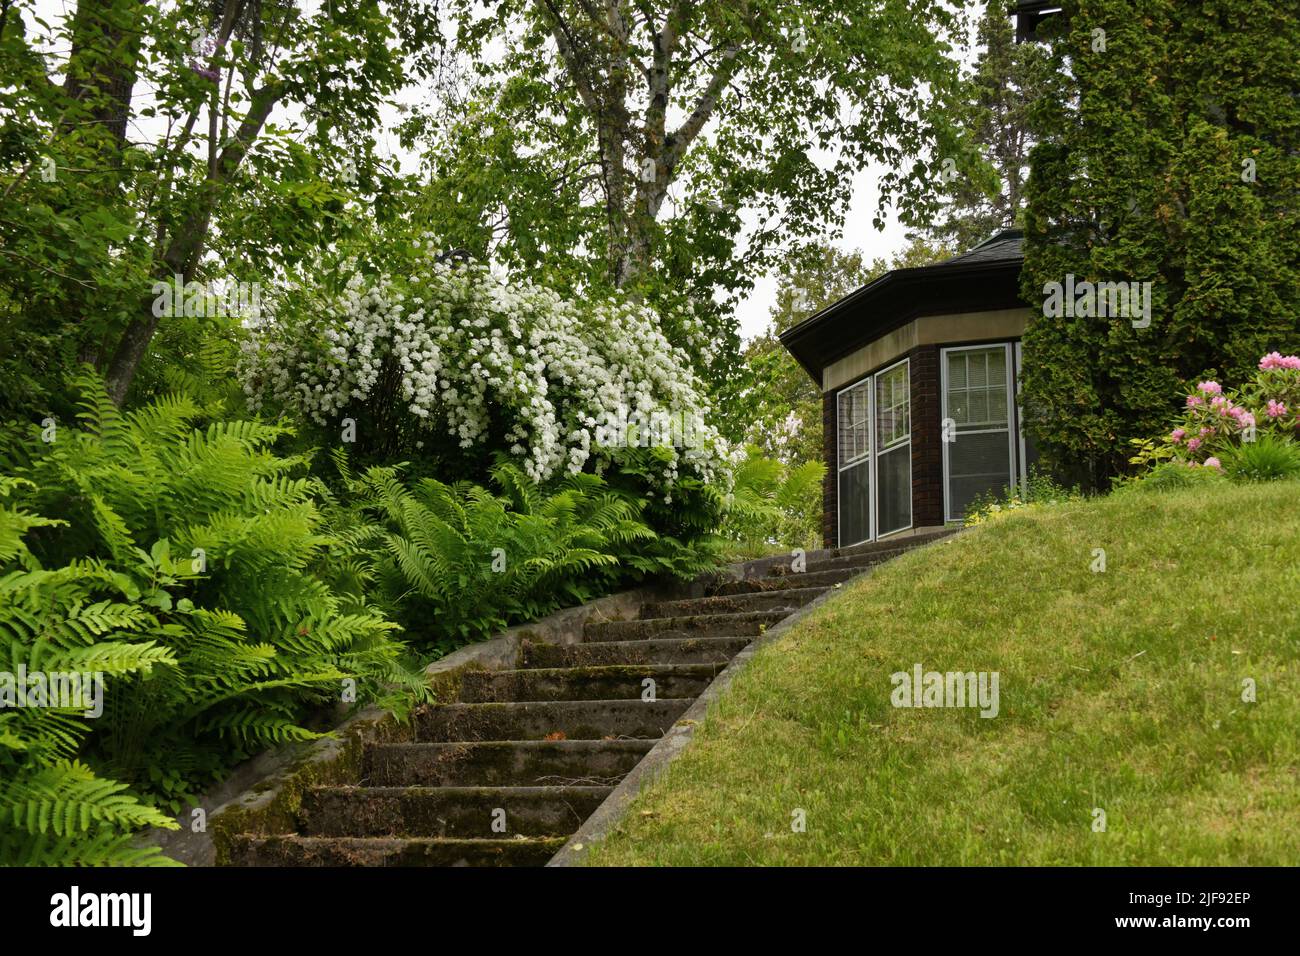 Old cement stairs lead up to a century old home in Ontario, Canada, which is partially seen among trees, ferns and flowering shrubs in the summertime. Stock Photo